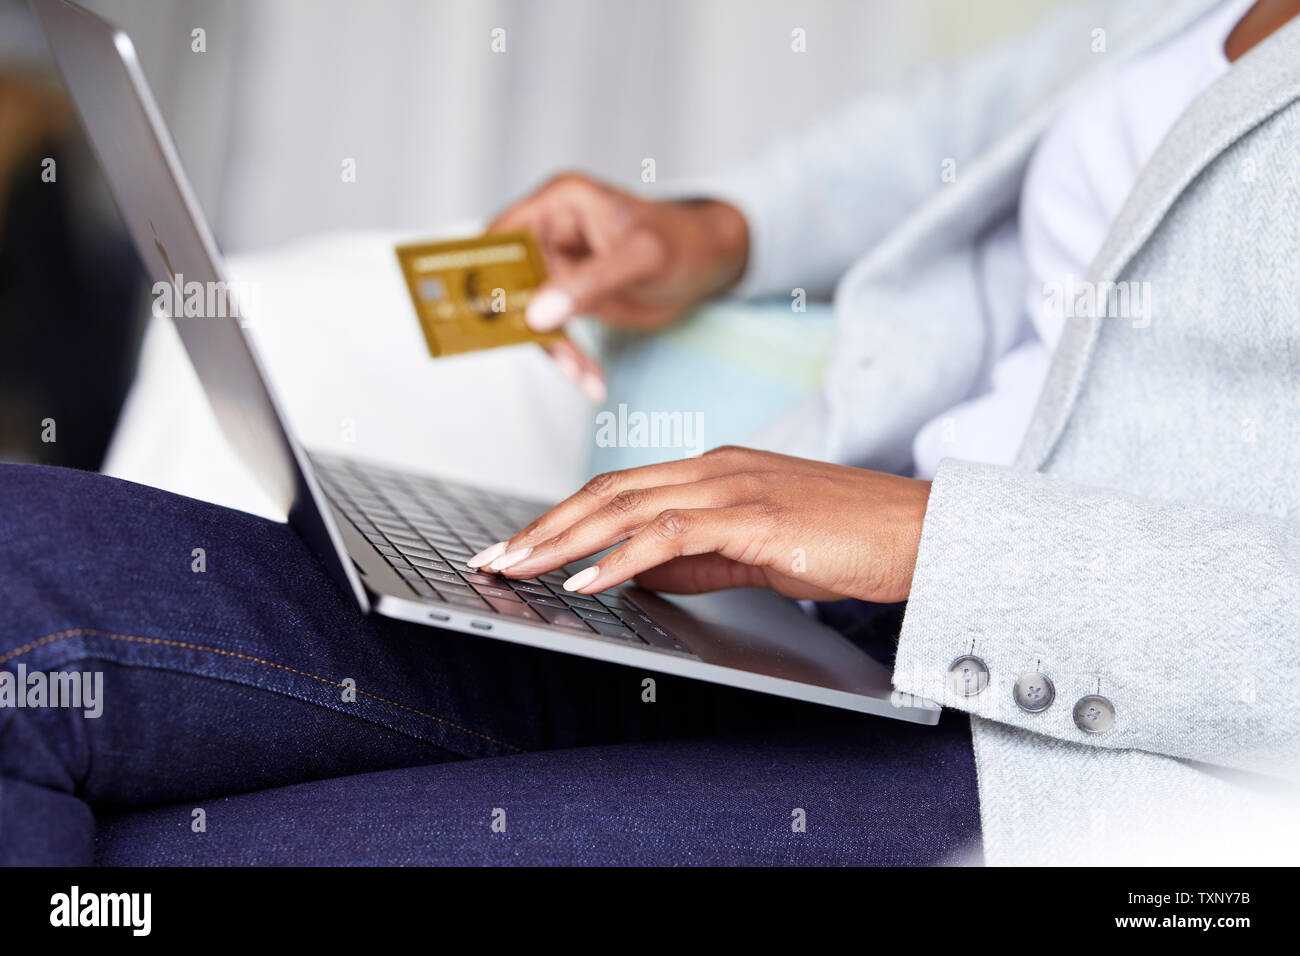 Ethnic woman shopping online using laptop Banque D'Images